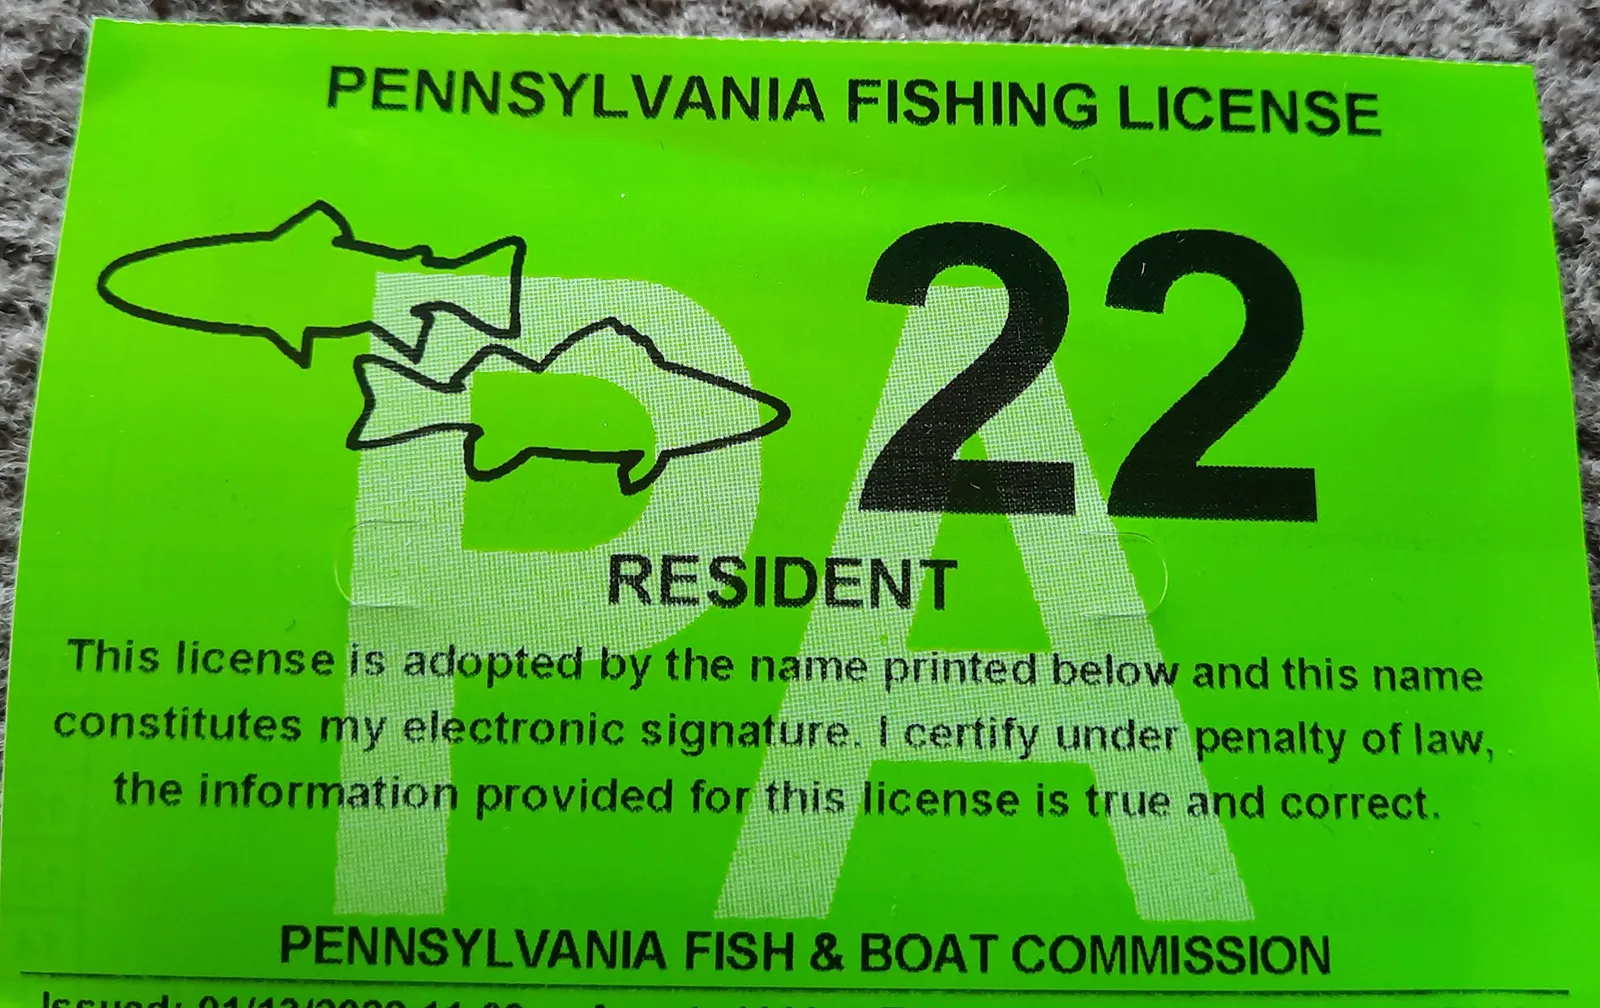 What Happens if You Get Caught Fishing Without a License?